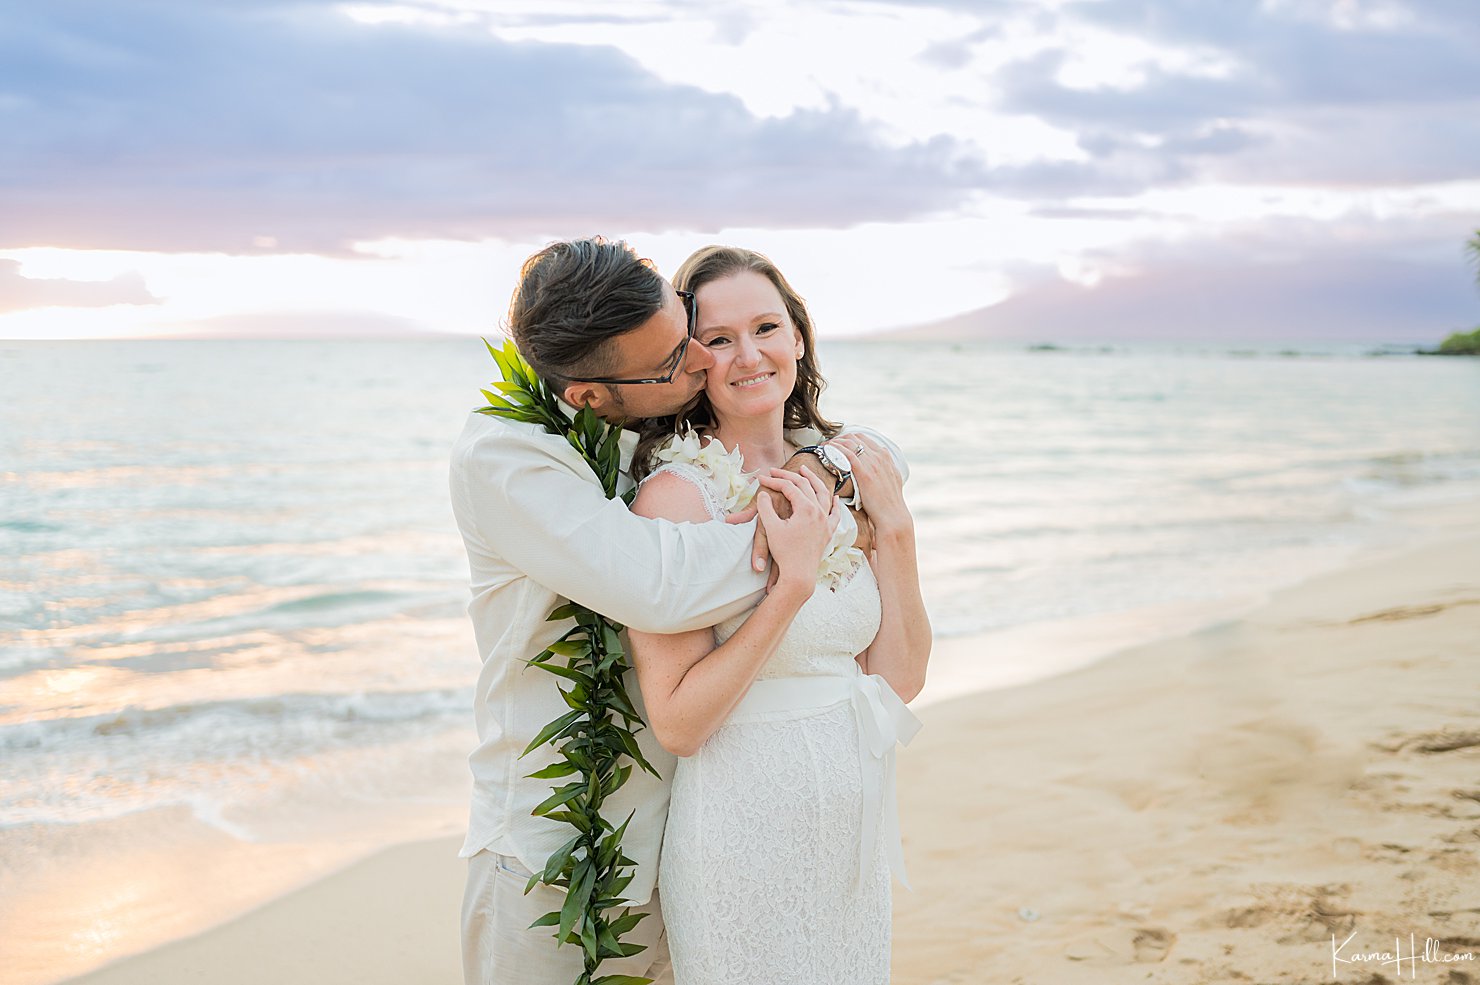 Hawaii Vow Renewal on the beach